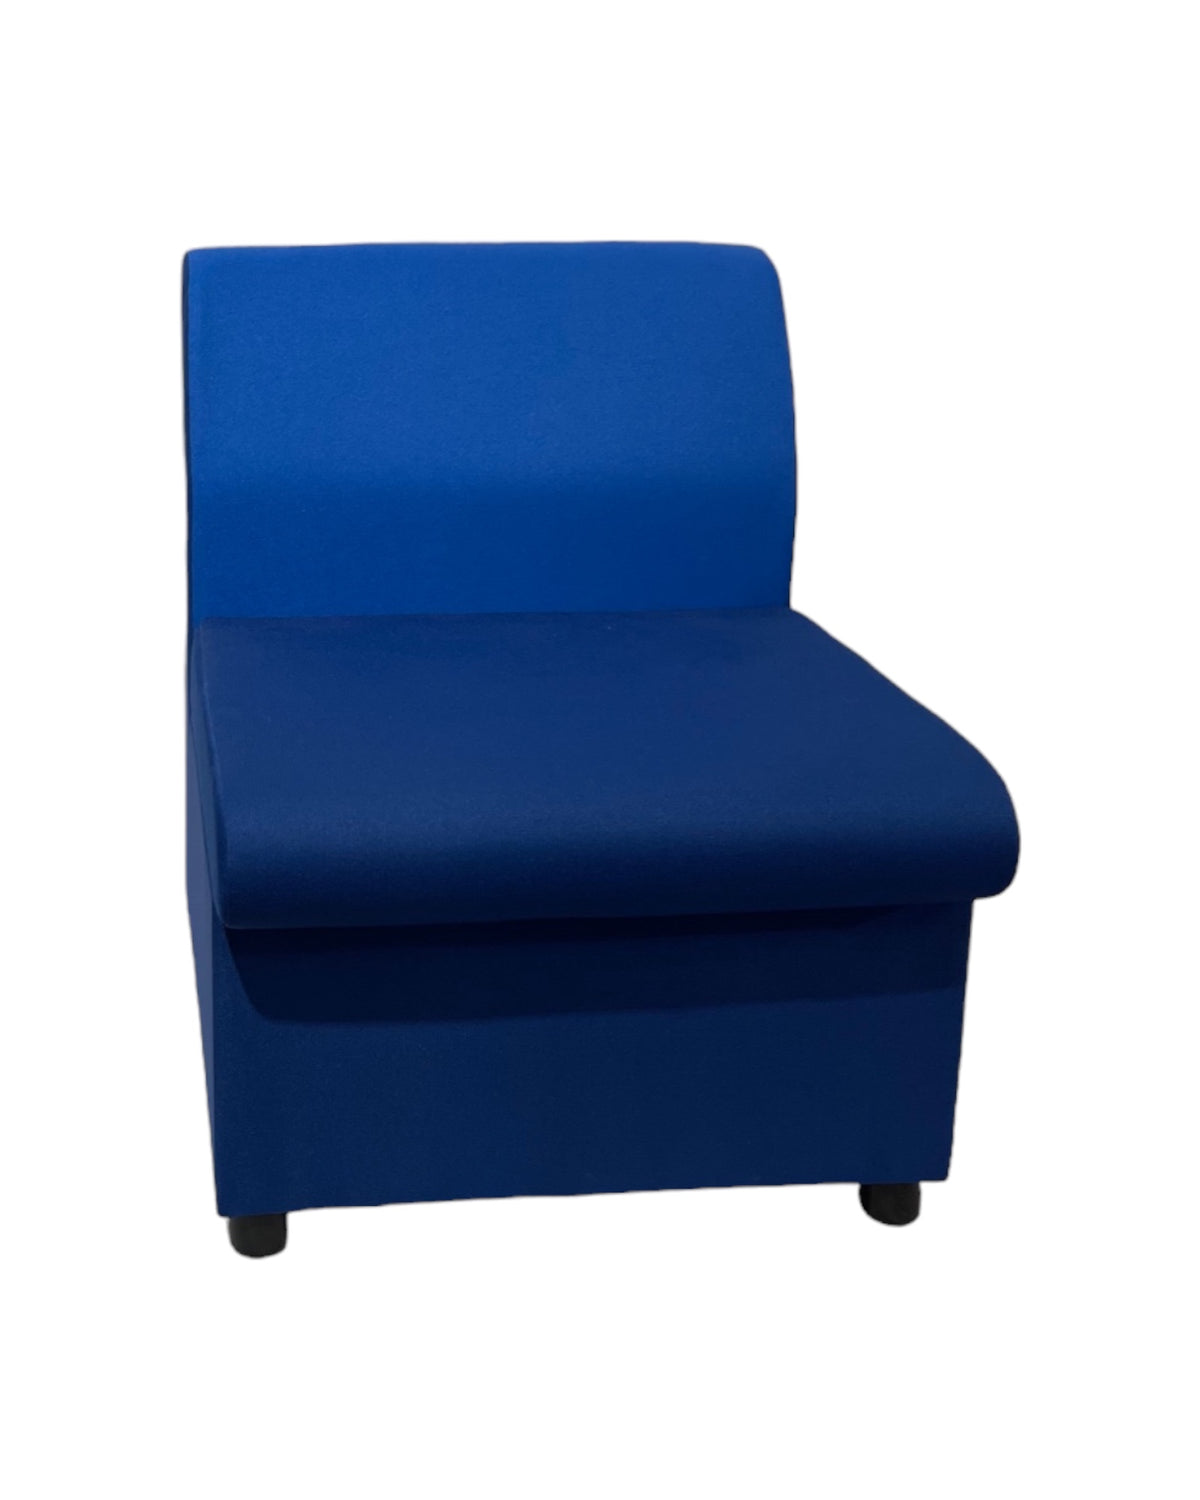 Nexus 1 fully upholstered reception seat